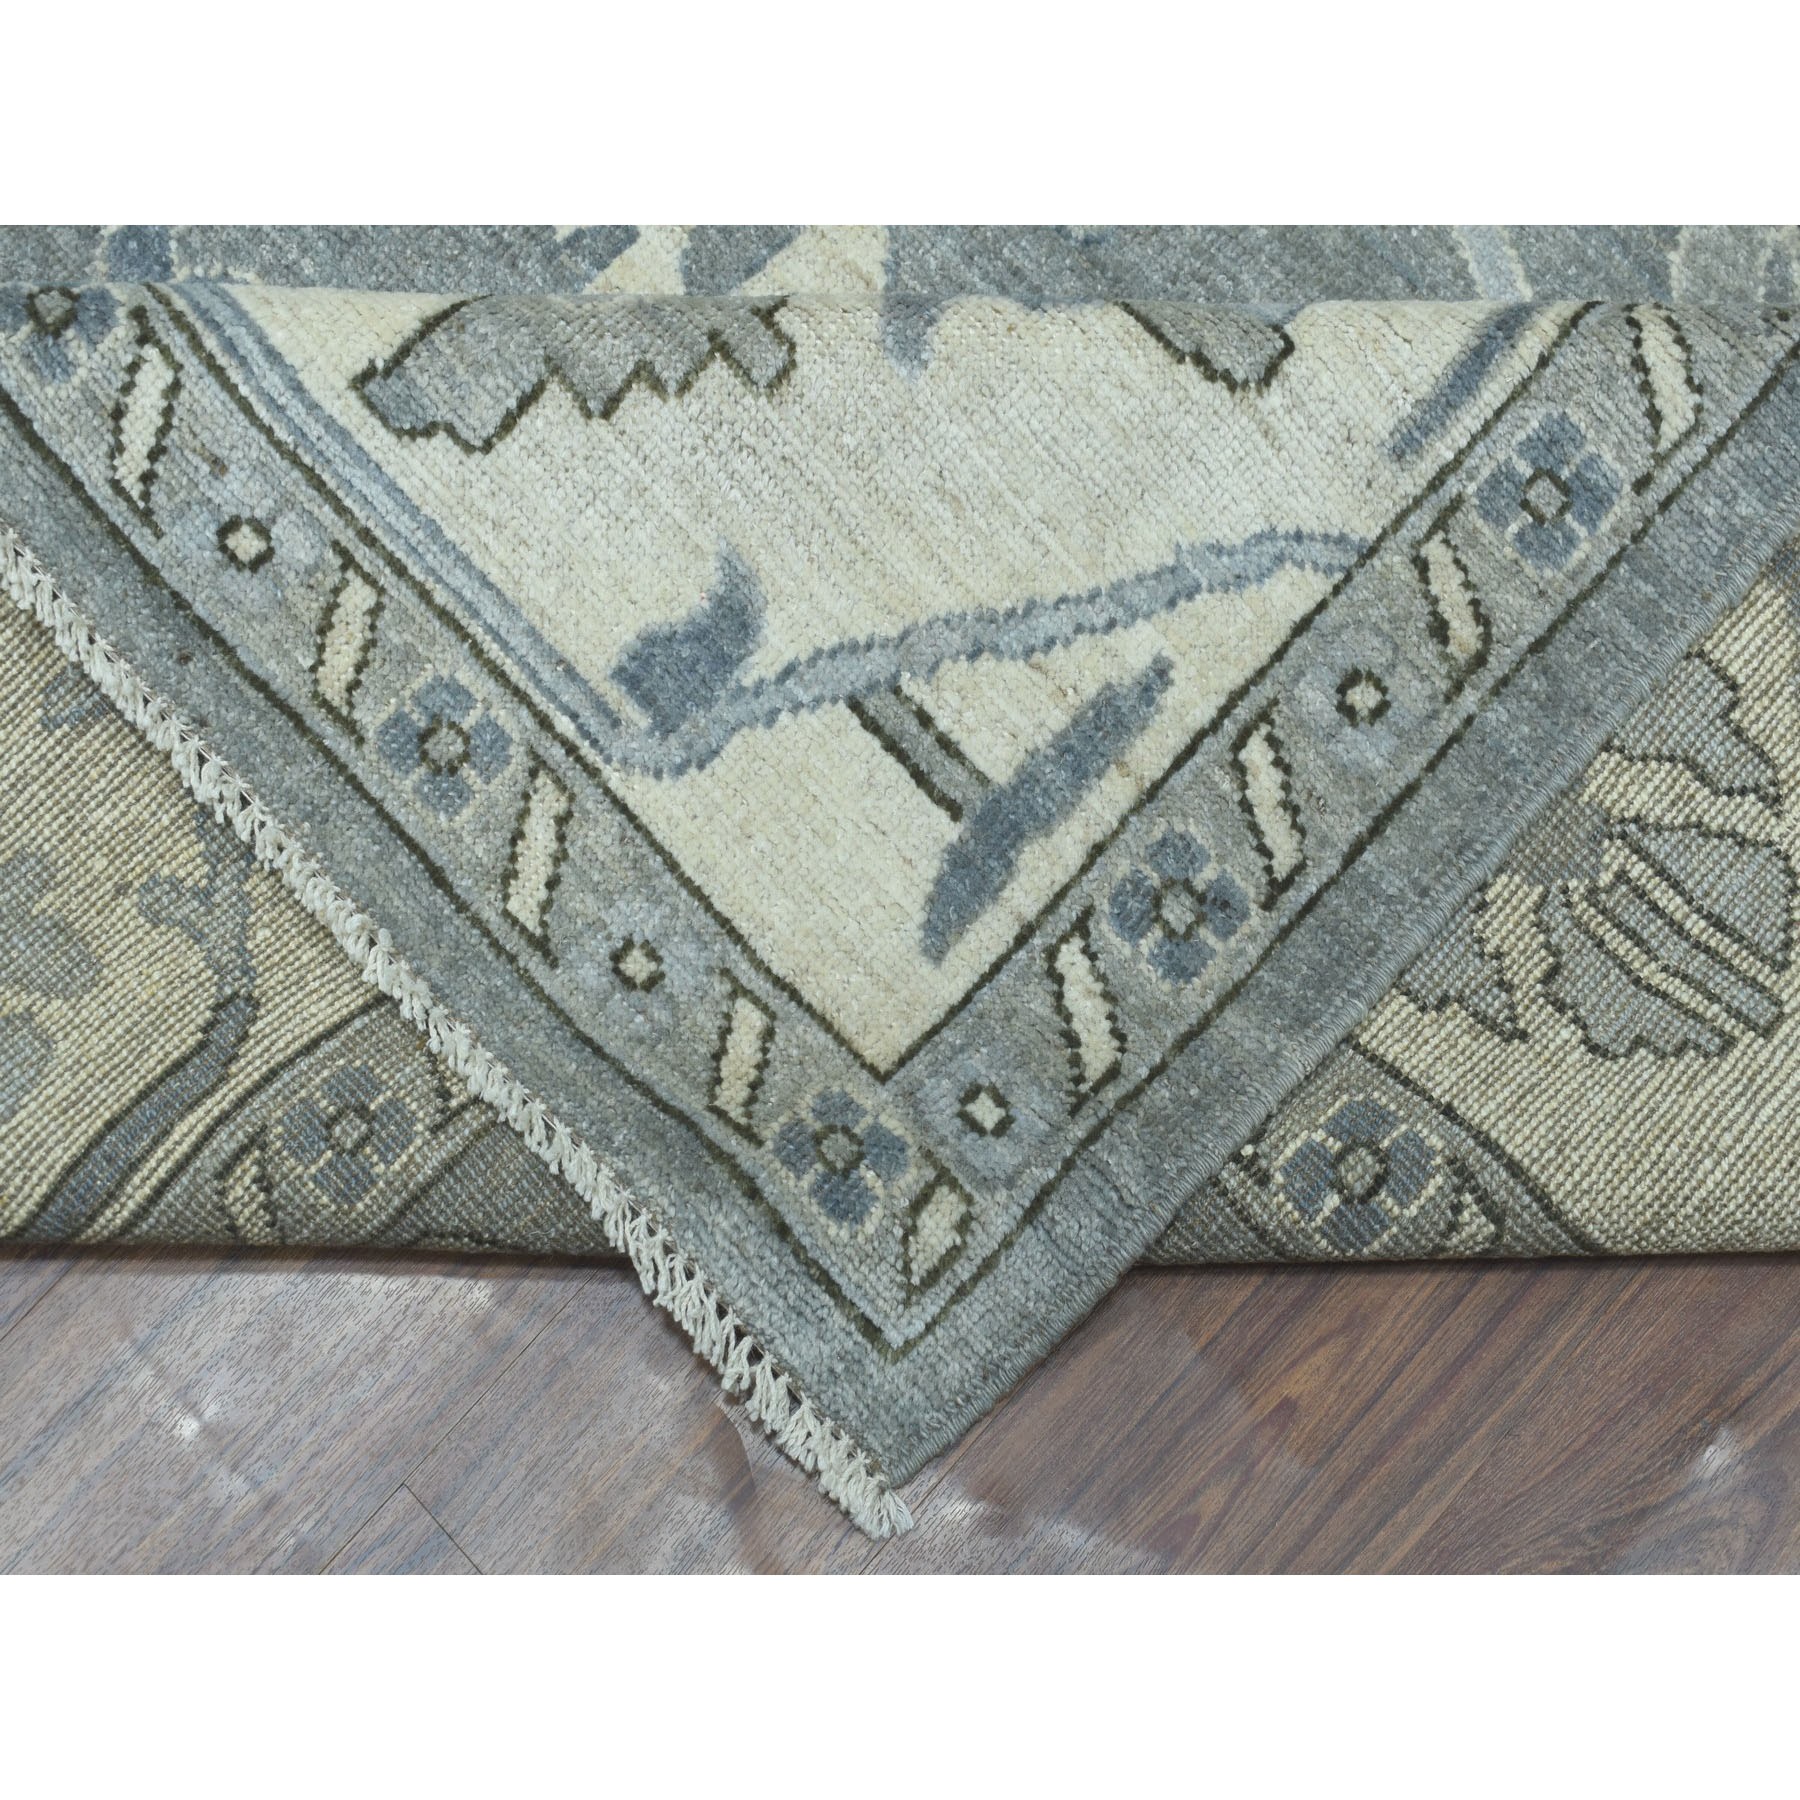 10-x13-4  Gray Angora Oushak Pure Wool Hand Knotted Oriental Rug 